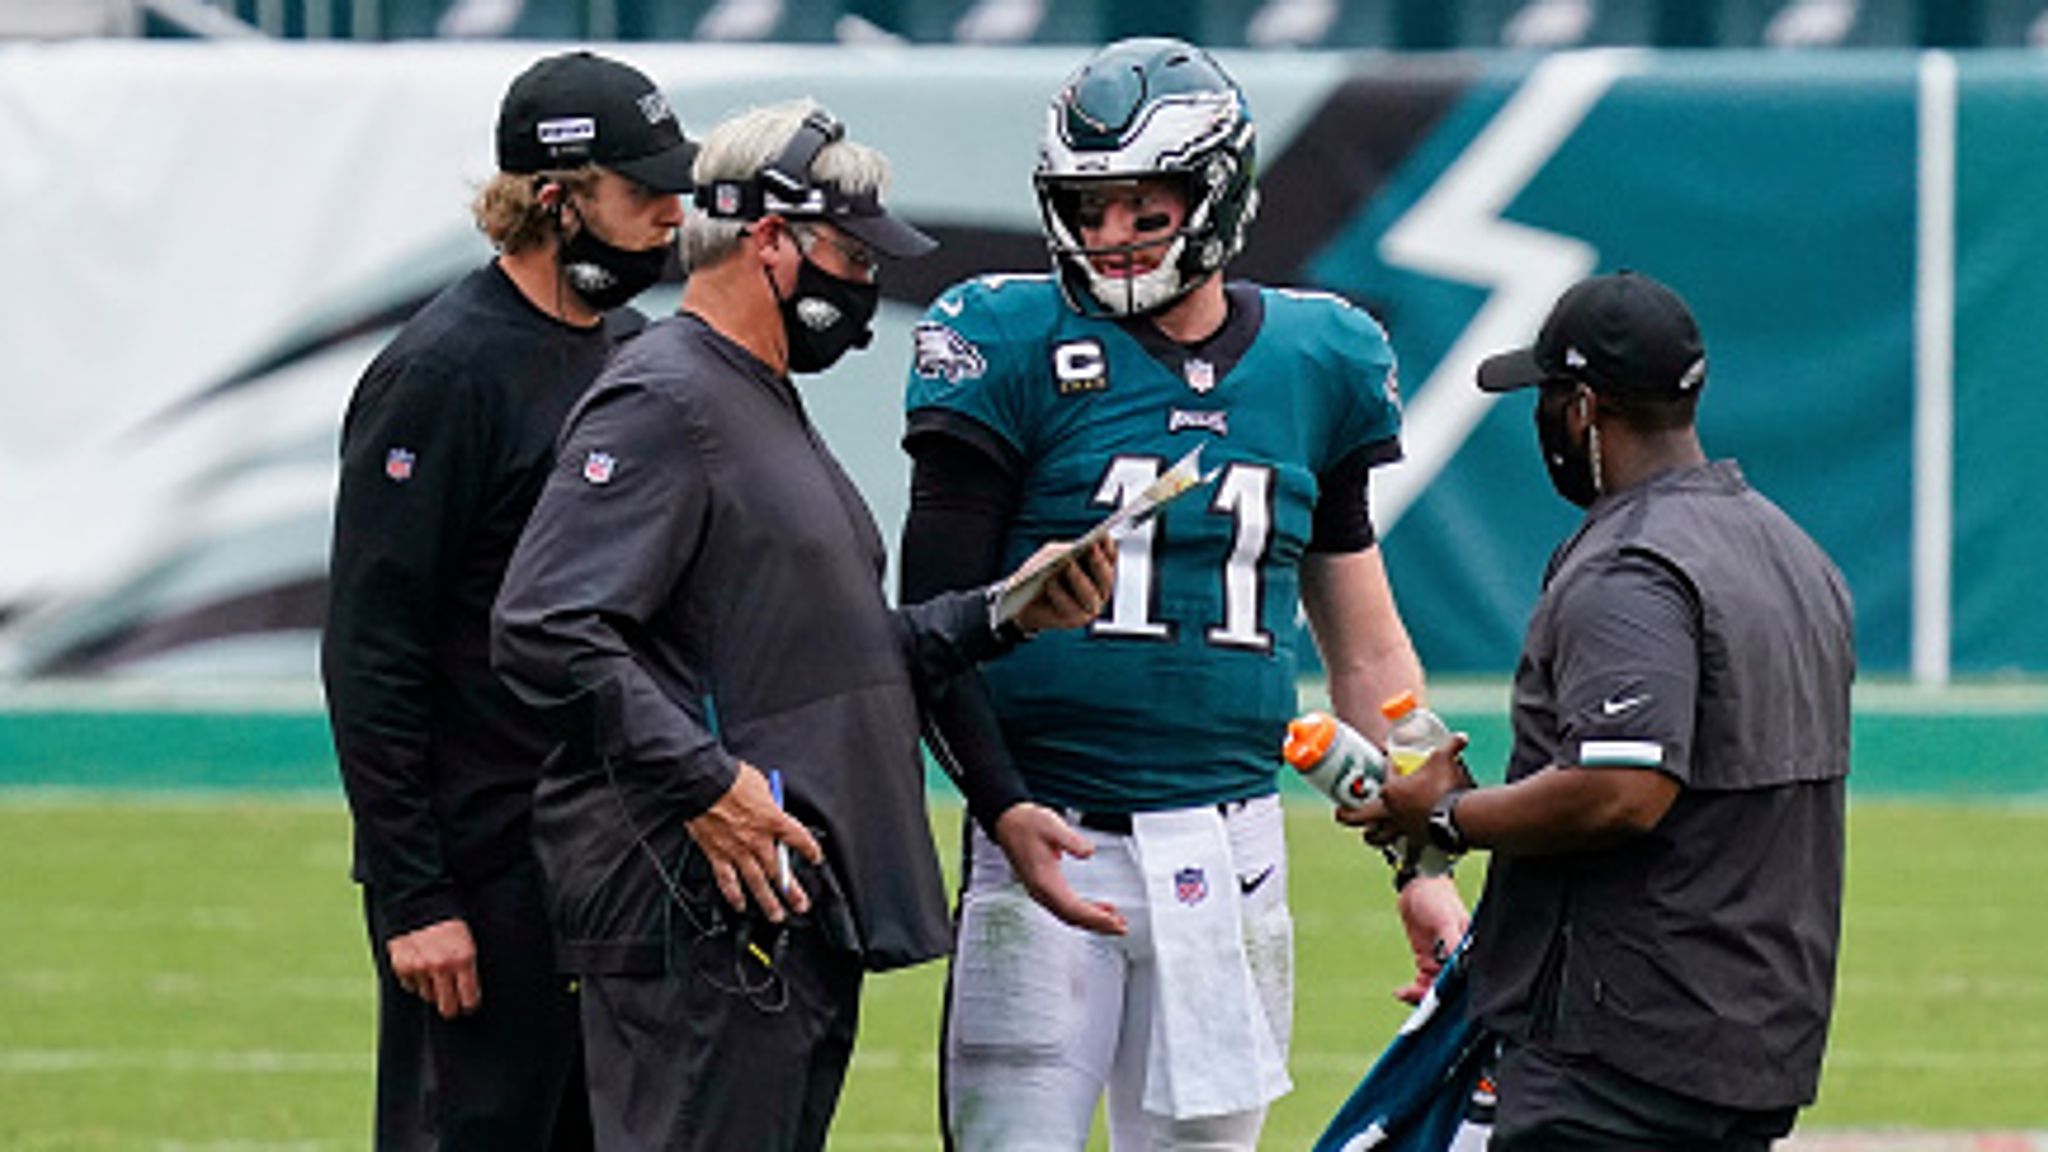 Eagles-Redskins: Carson Wentz's jersey ripped (photos) - Sports Illustrated